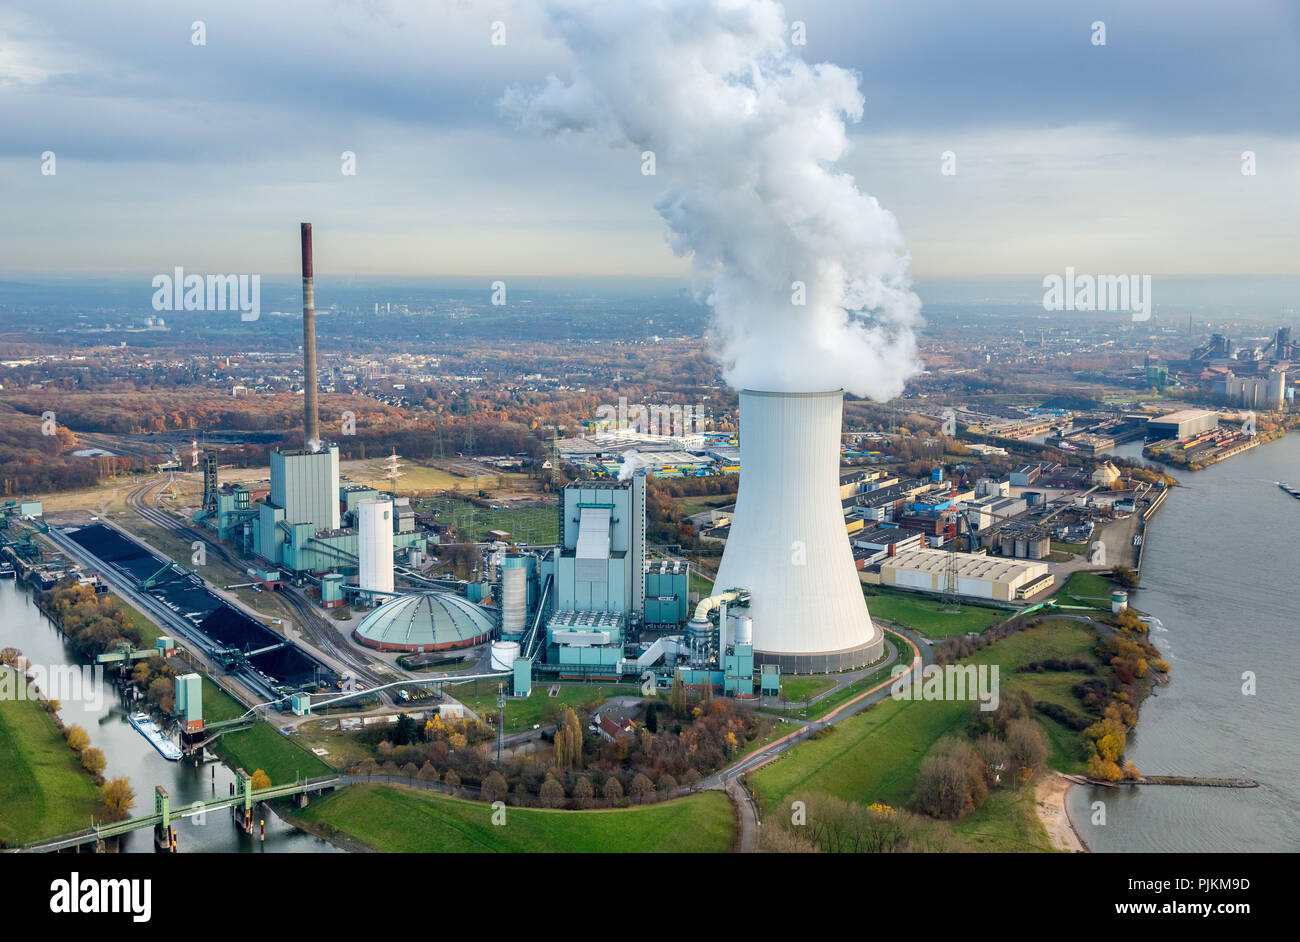 STEAG power plant Duisburg Walsum, coal-fired power station, fossil energy, cooling tower, smoke cloud, Duisburg, Ruhr area, North Rhine-Westphalia, Germany Stock Photo